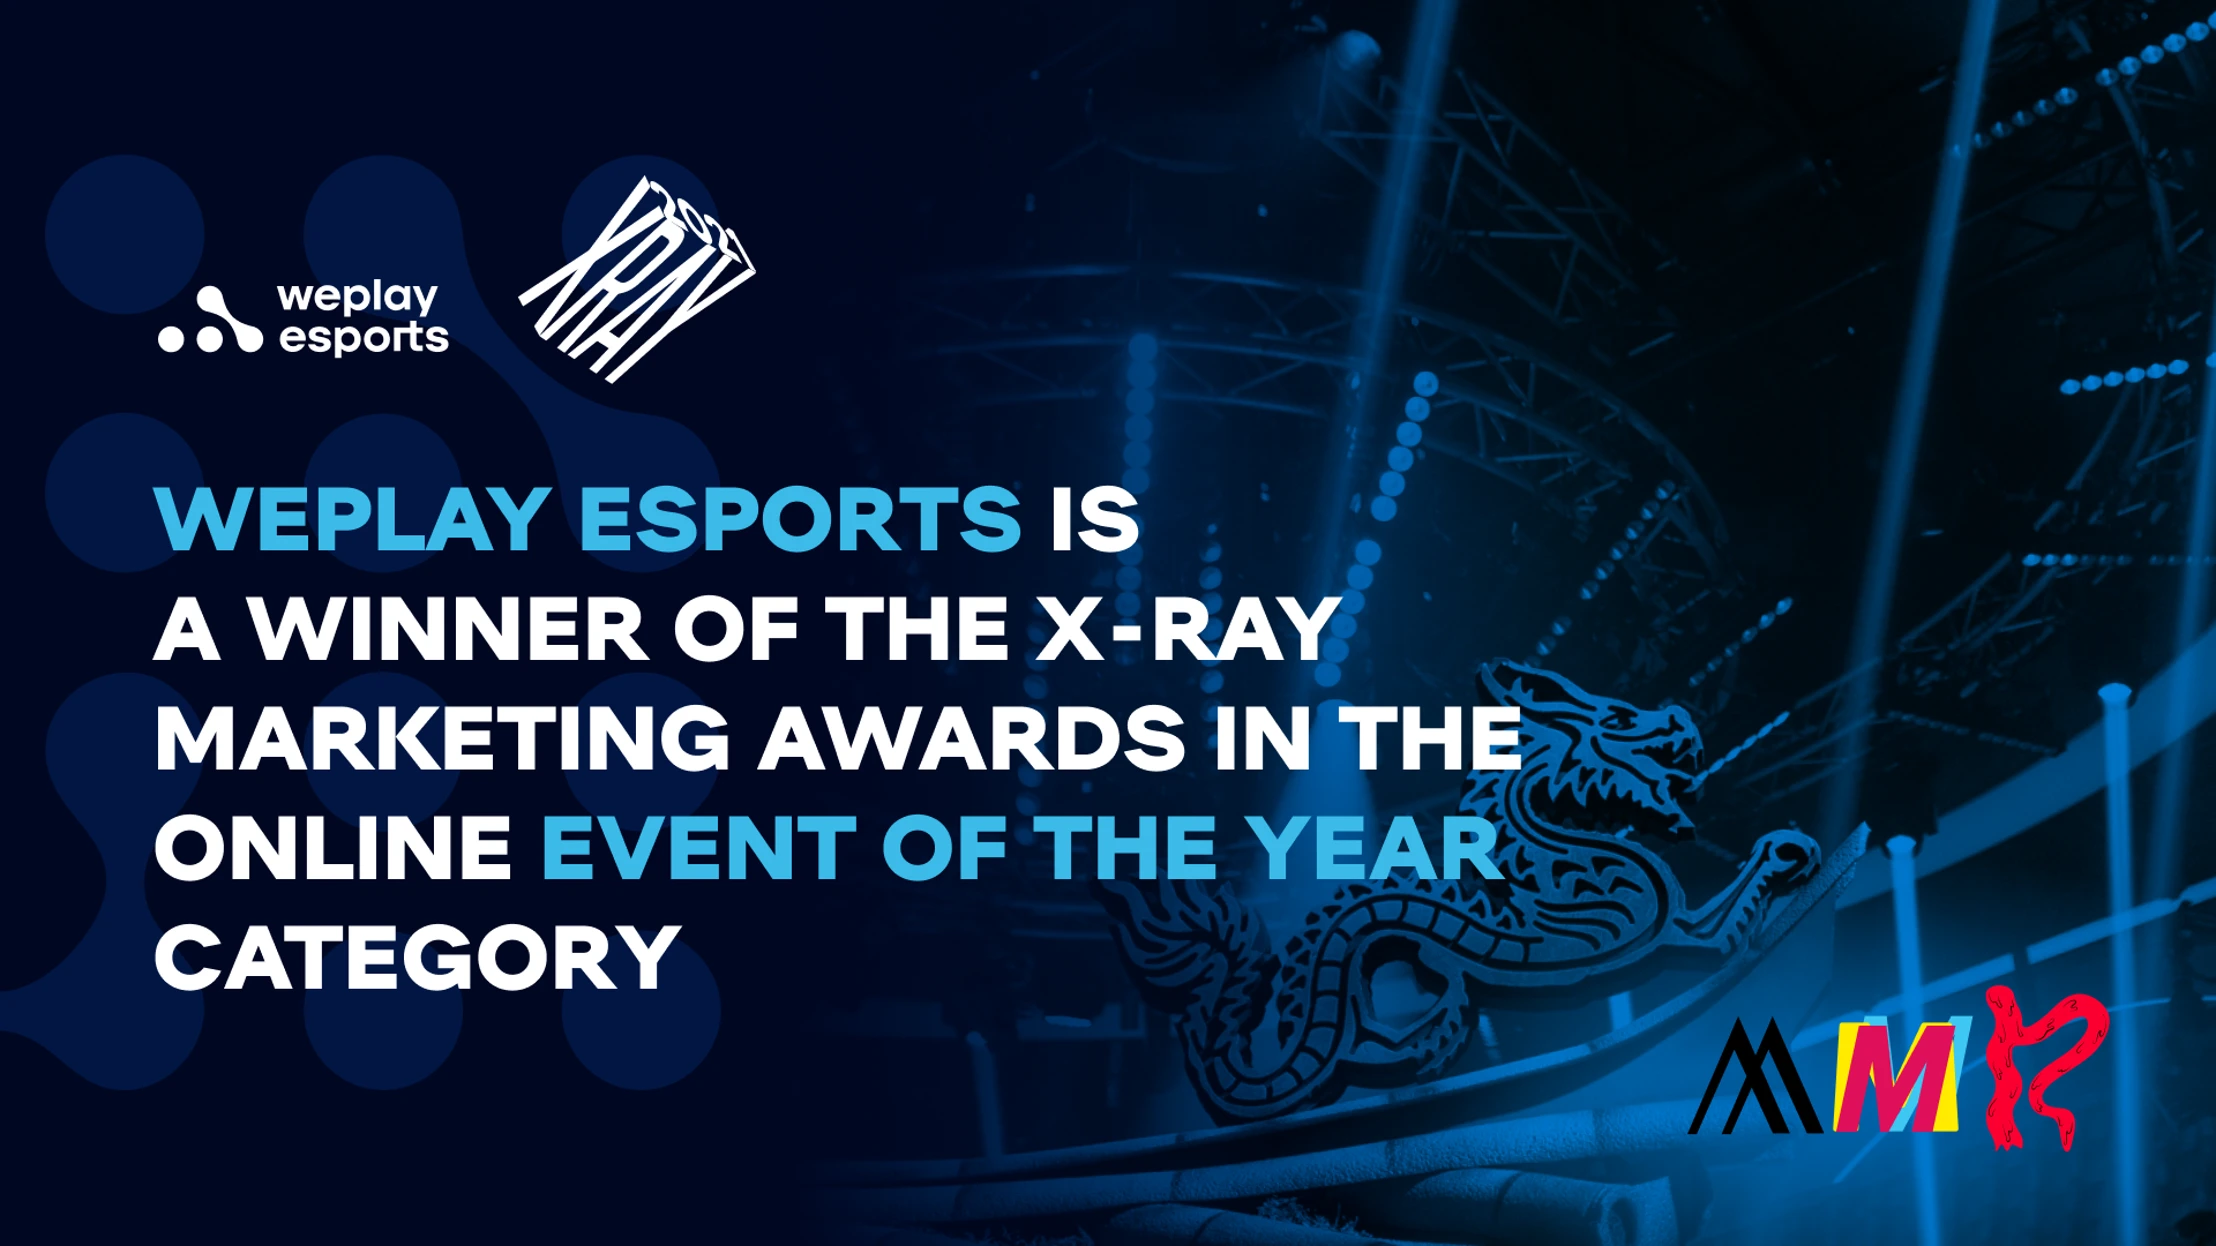 WePlay Esports is a winner of the X-Ray Marketing Awards